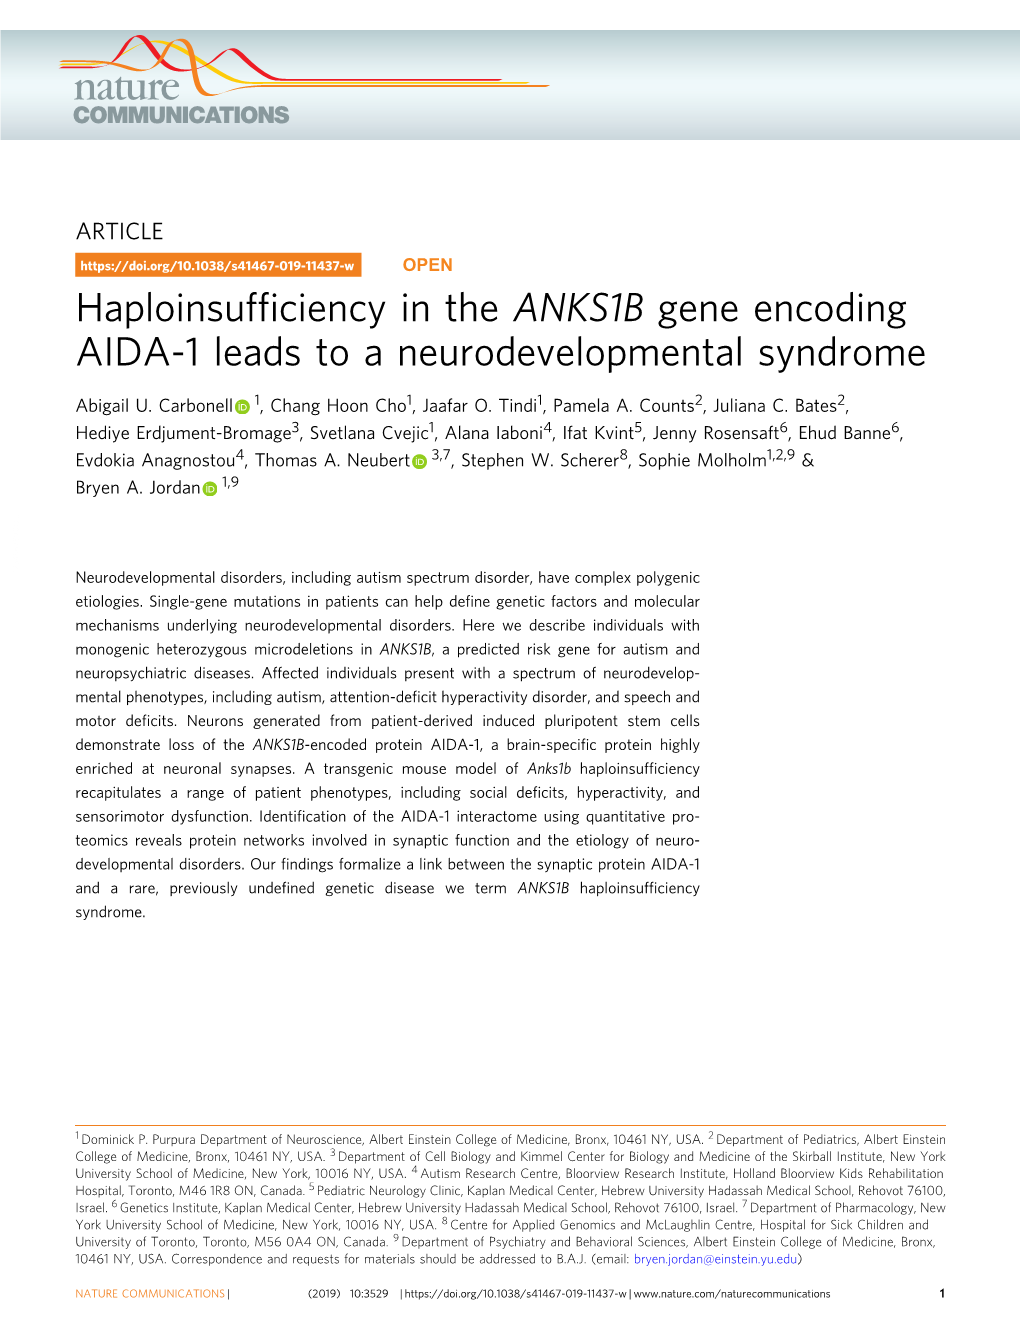 Haploinsufficiency in the ANKS1B Gene Encoding AIDA-1 Leads to A